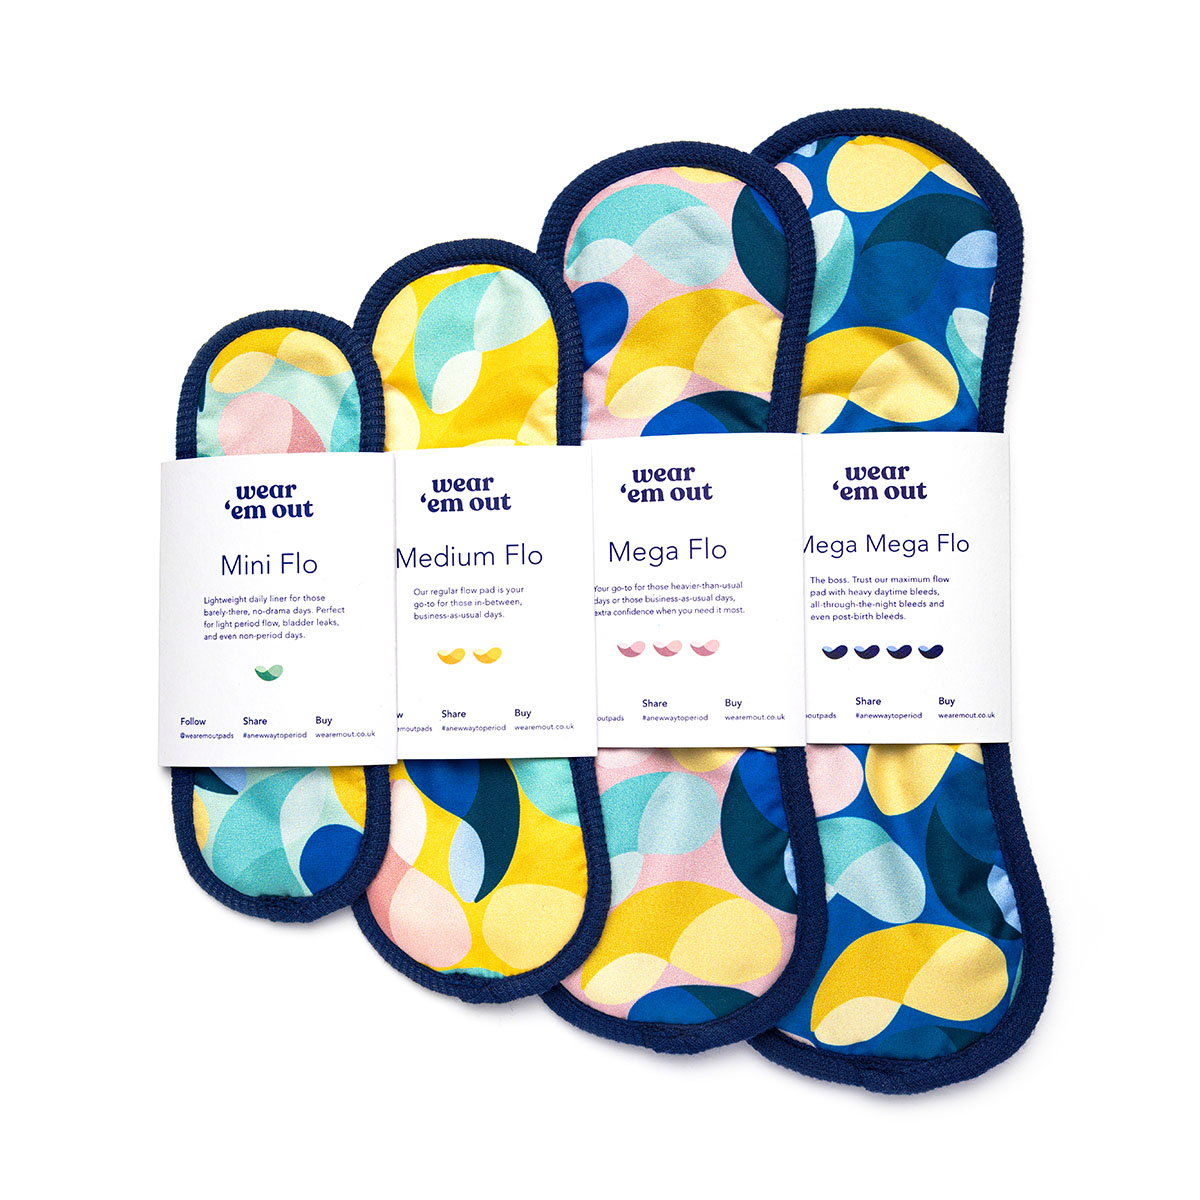 'Wear Em Out' fabric period pads in bright colours, in cardboard sleeve packaging, with variations 'Mega Flo', 'Medium Flo', and 'Mini Flo'.